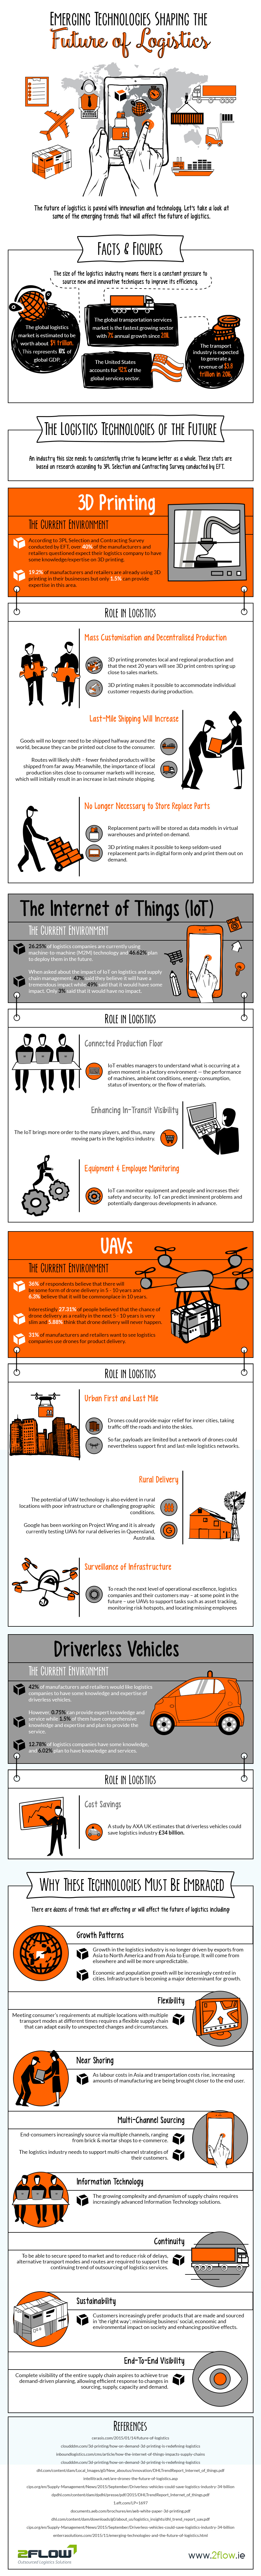 Emerging-Trends-in-Logistics-infogrpahic